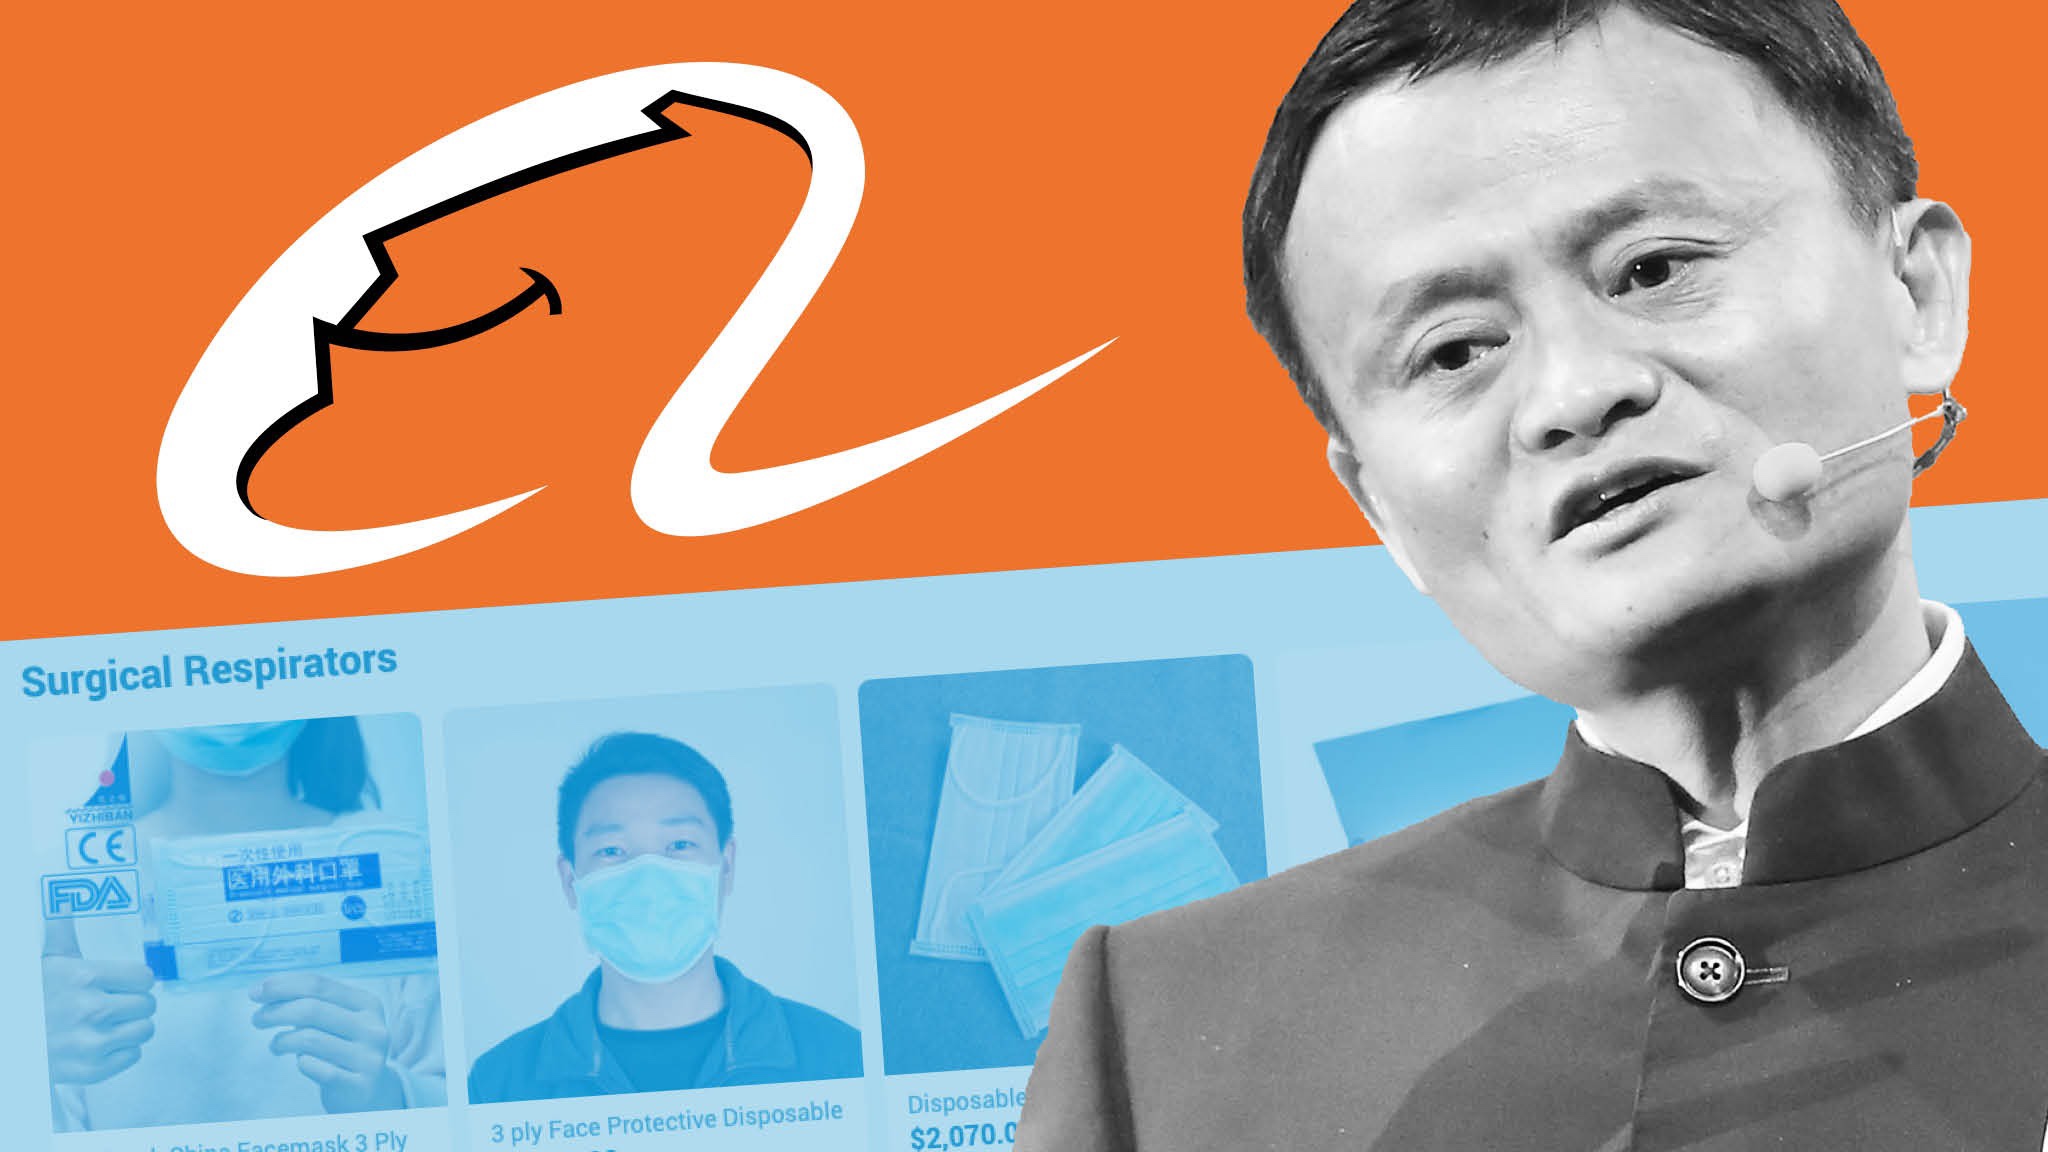 Bloomberg: Alibaba Nears First Big Deal Since Record Antitrust Fine